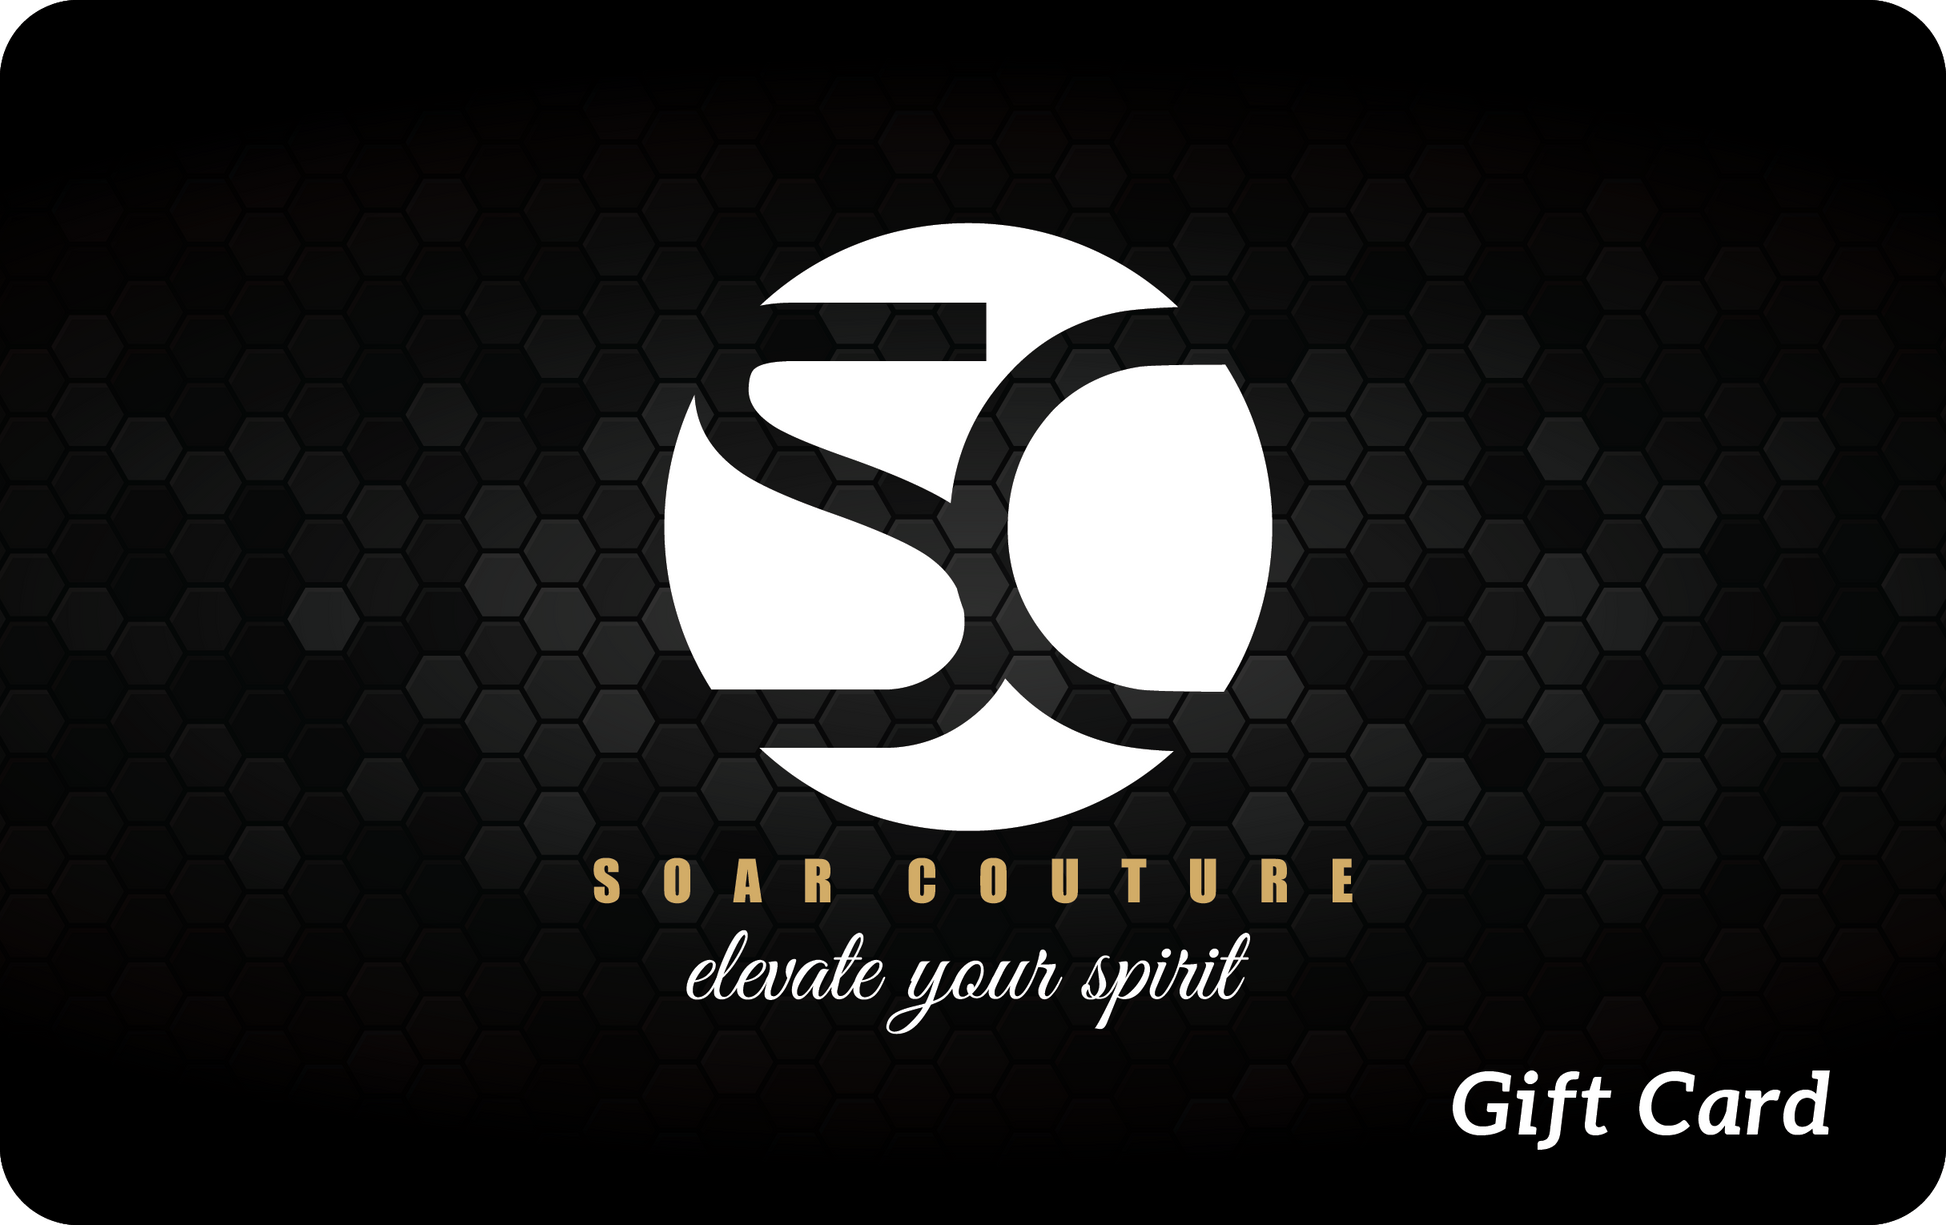 Gift Card 2 - SoarCouture